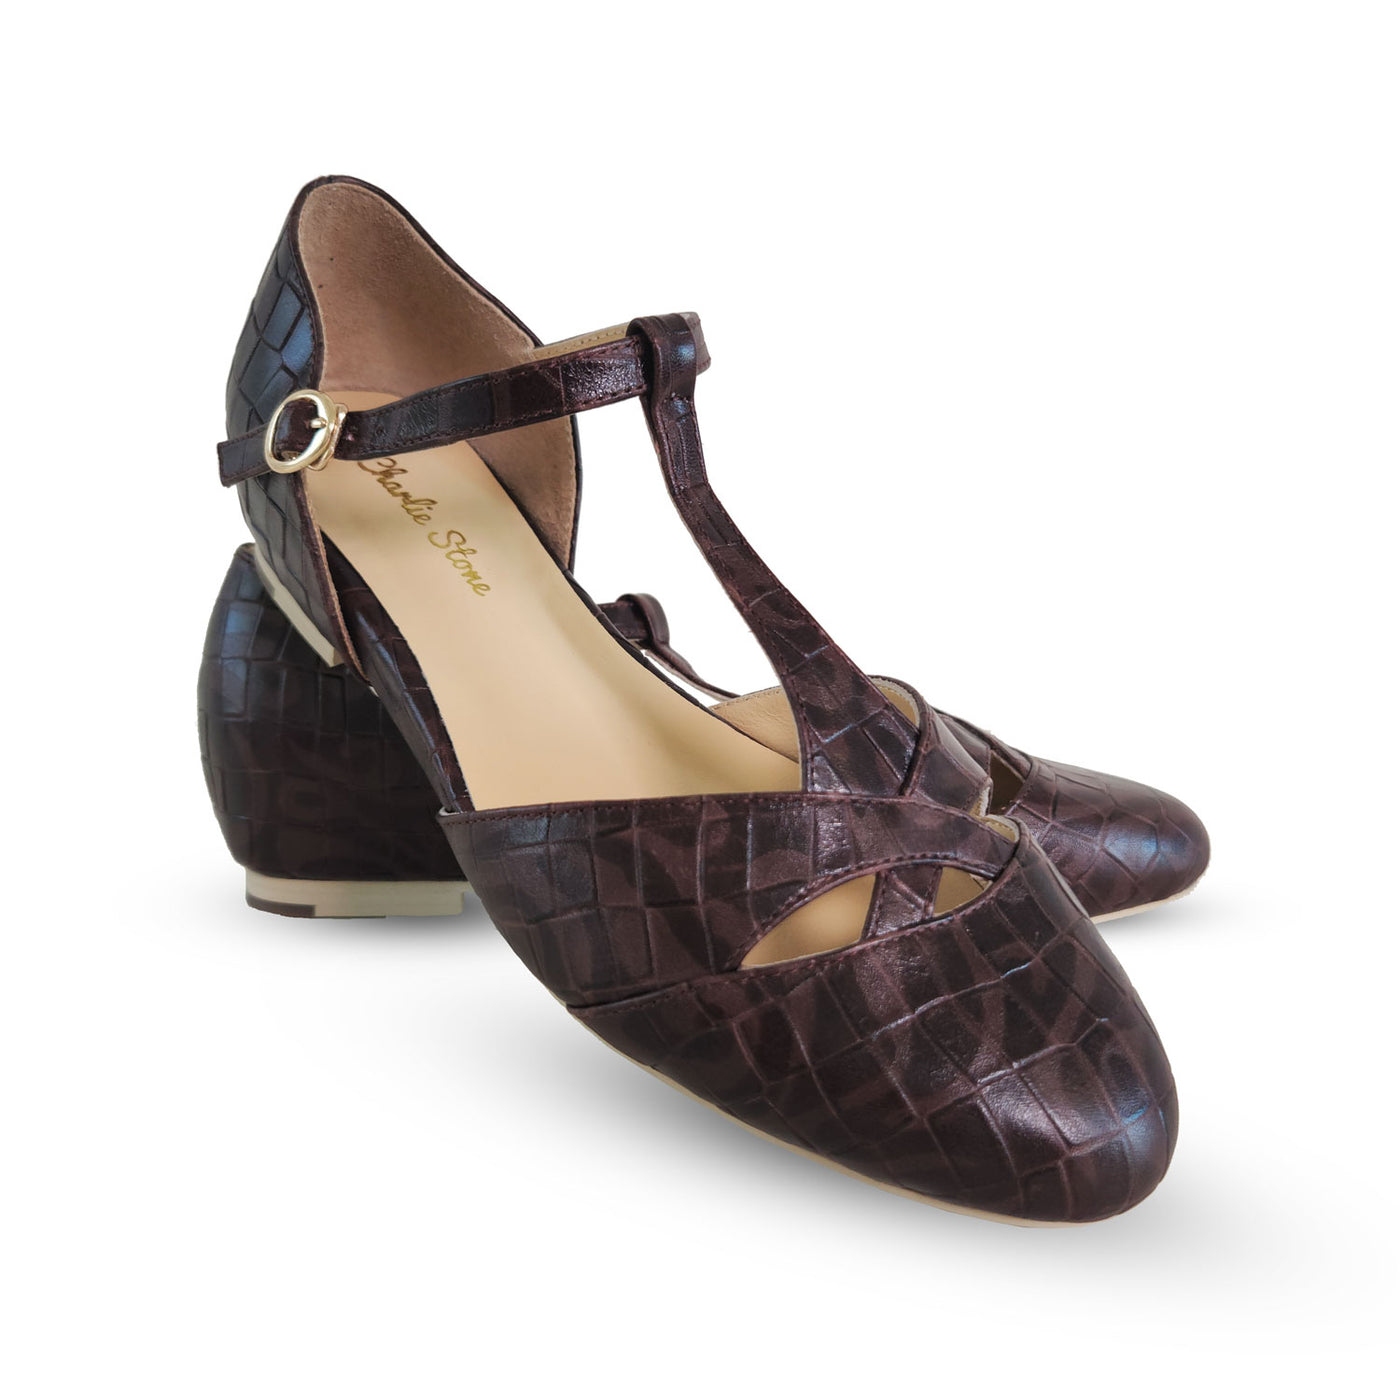 Charlie Stone Vintage Inspired flats Retro 1940’s 1950’s Style Ladies Shoes crocodile leather espresso